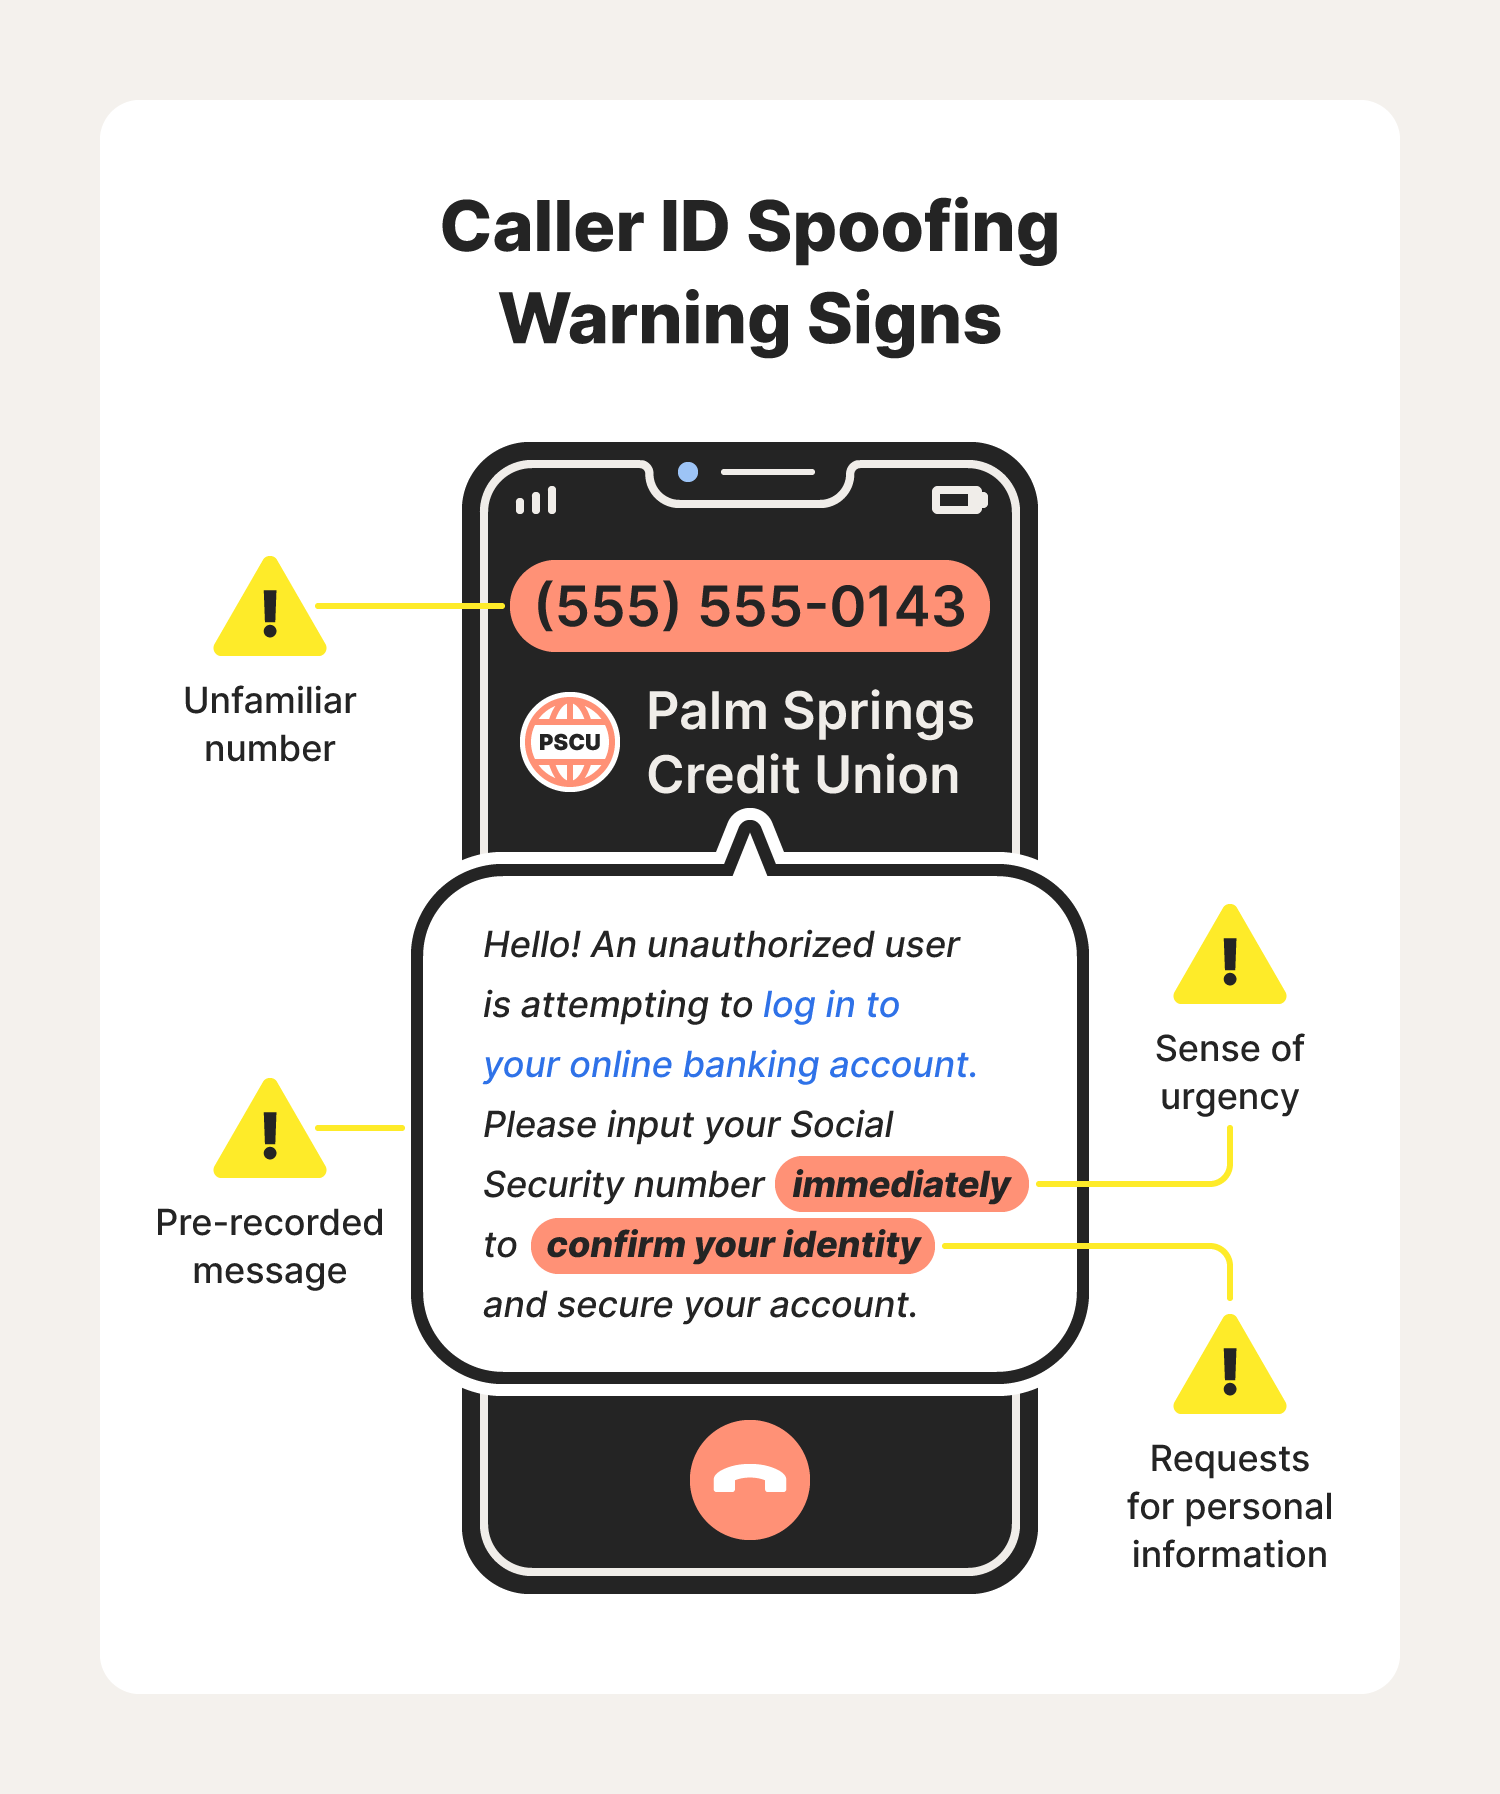 A graphic highlights warning signs of caller ID spoofing.